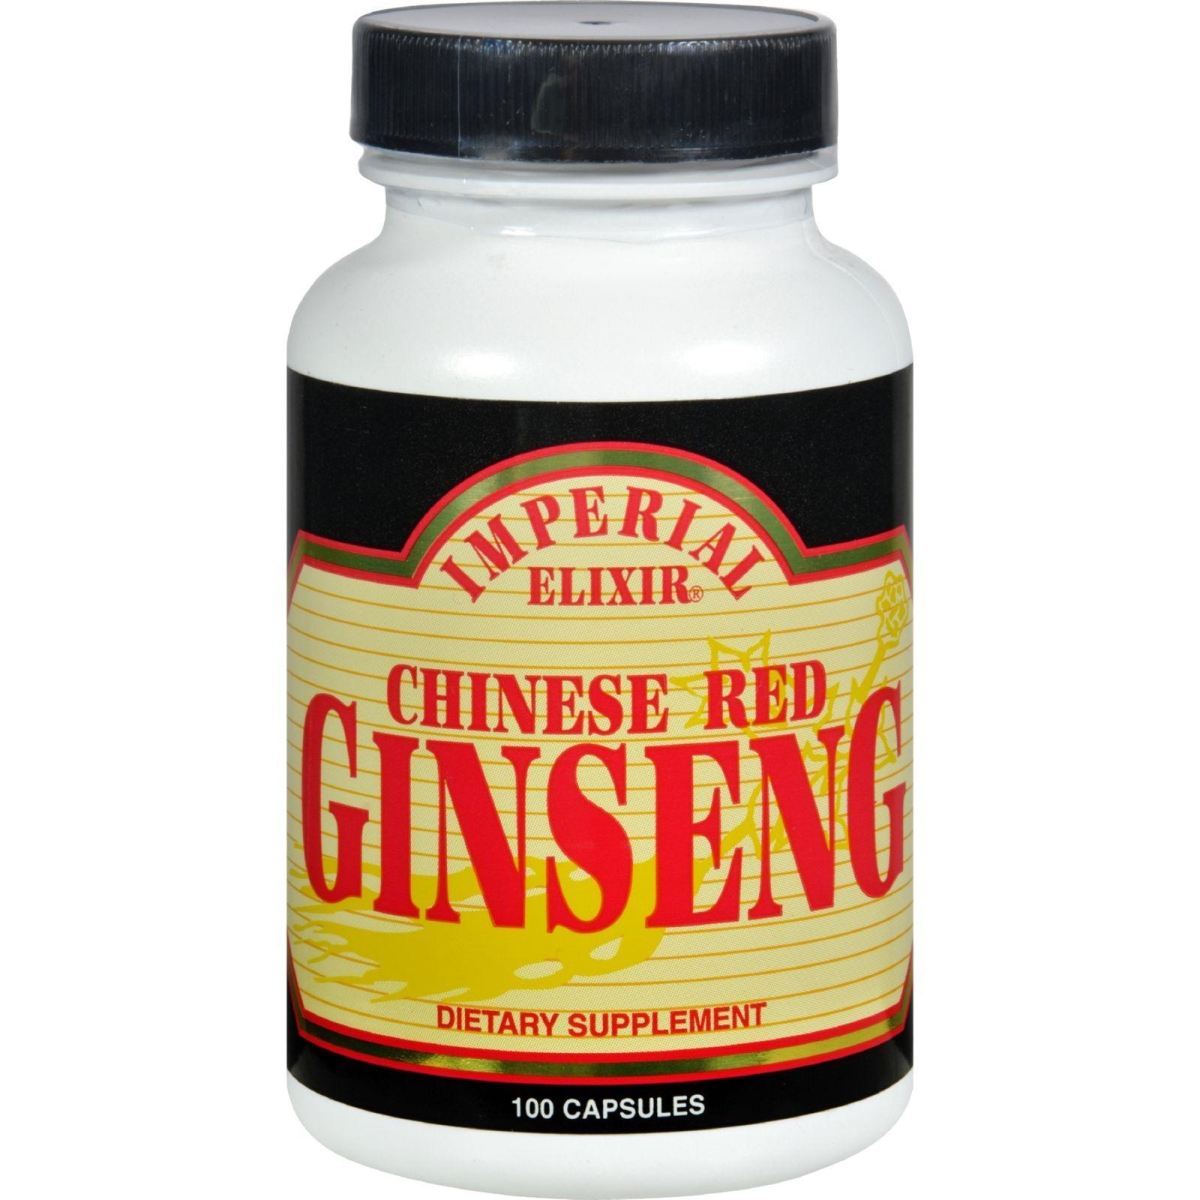 Hg0629717 Chinese Red Ginseng - 100 Capsules